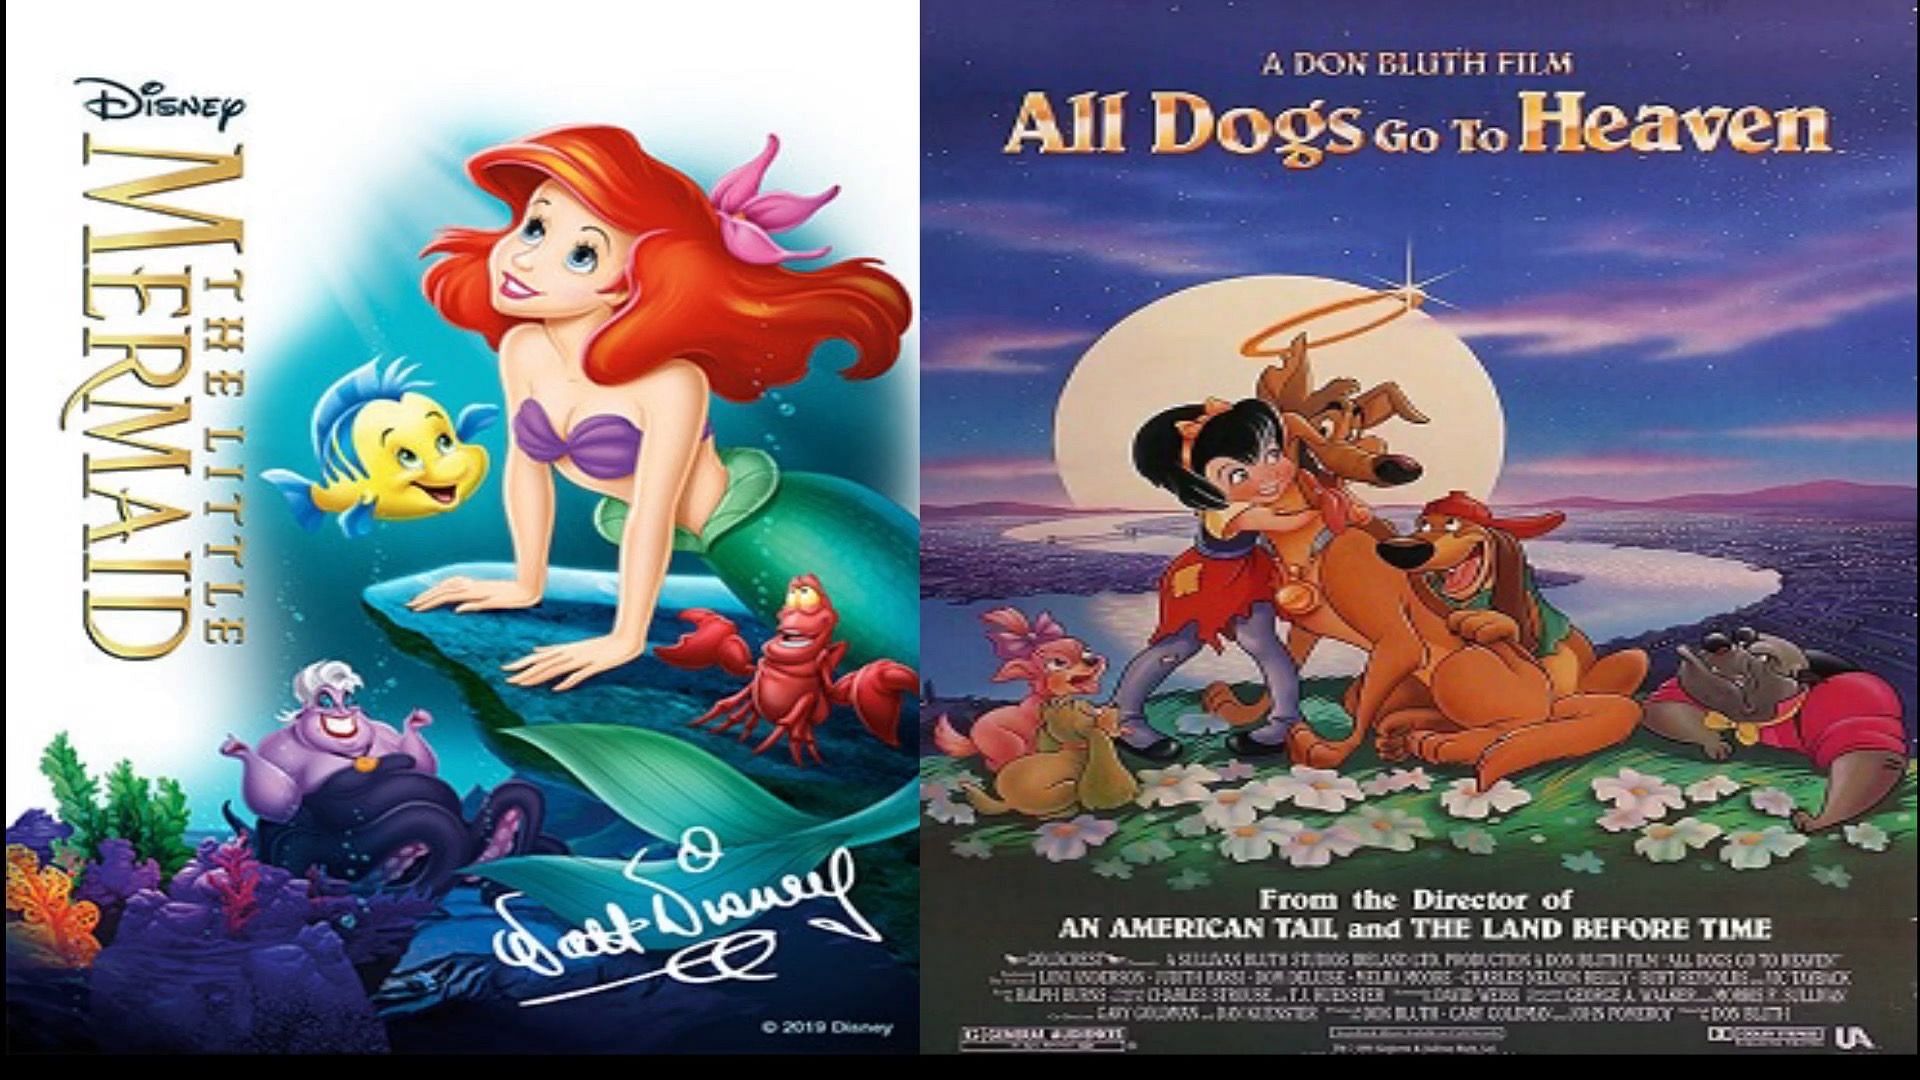 The Little Mermaid and All Dogs Go To Heaven came out in the same year (Image via Disney/Don Bluth)